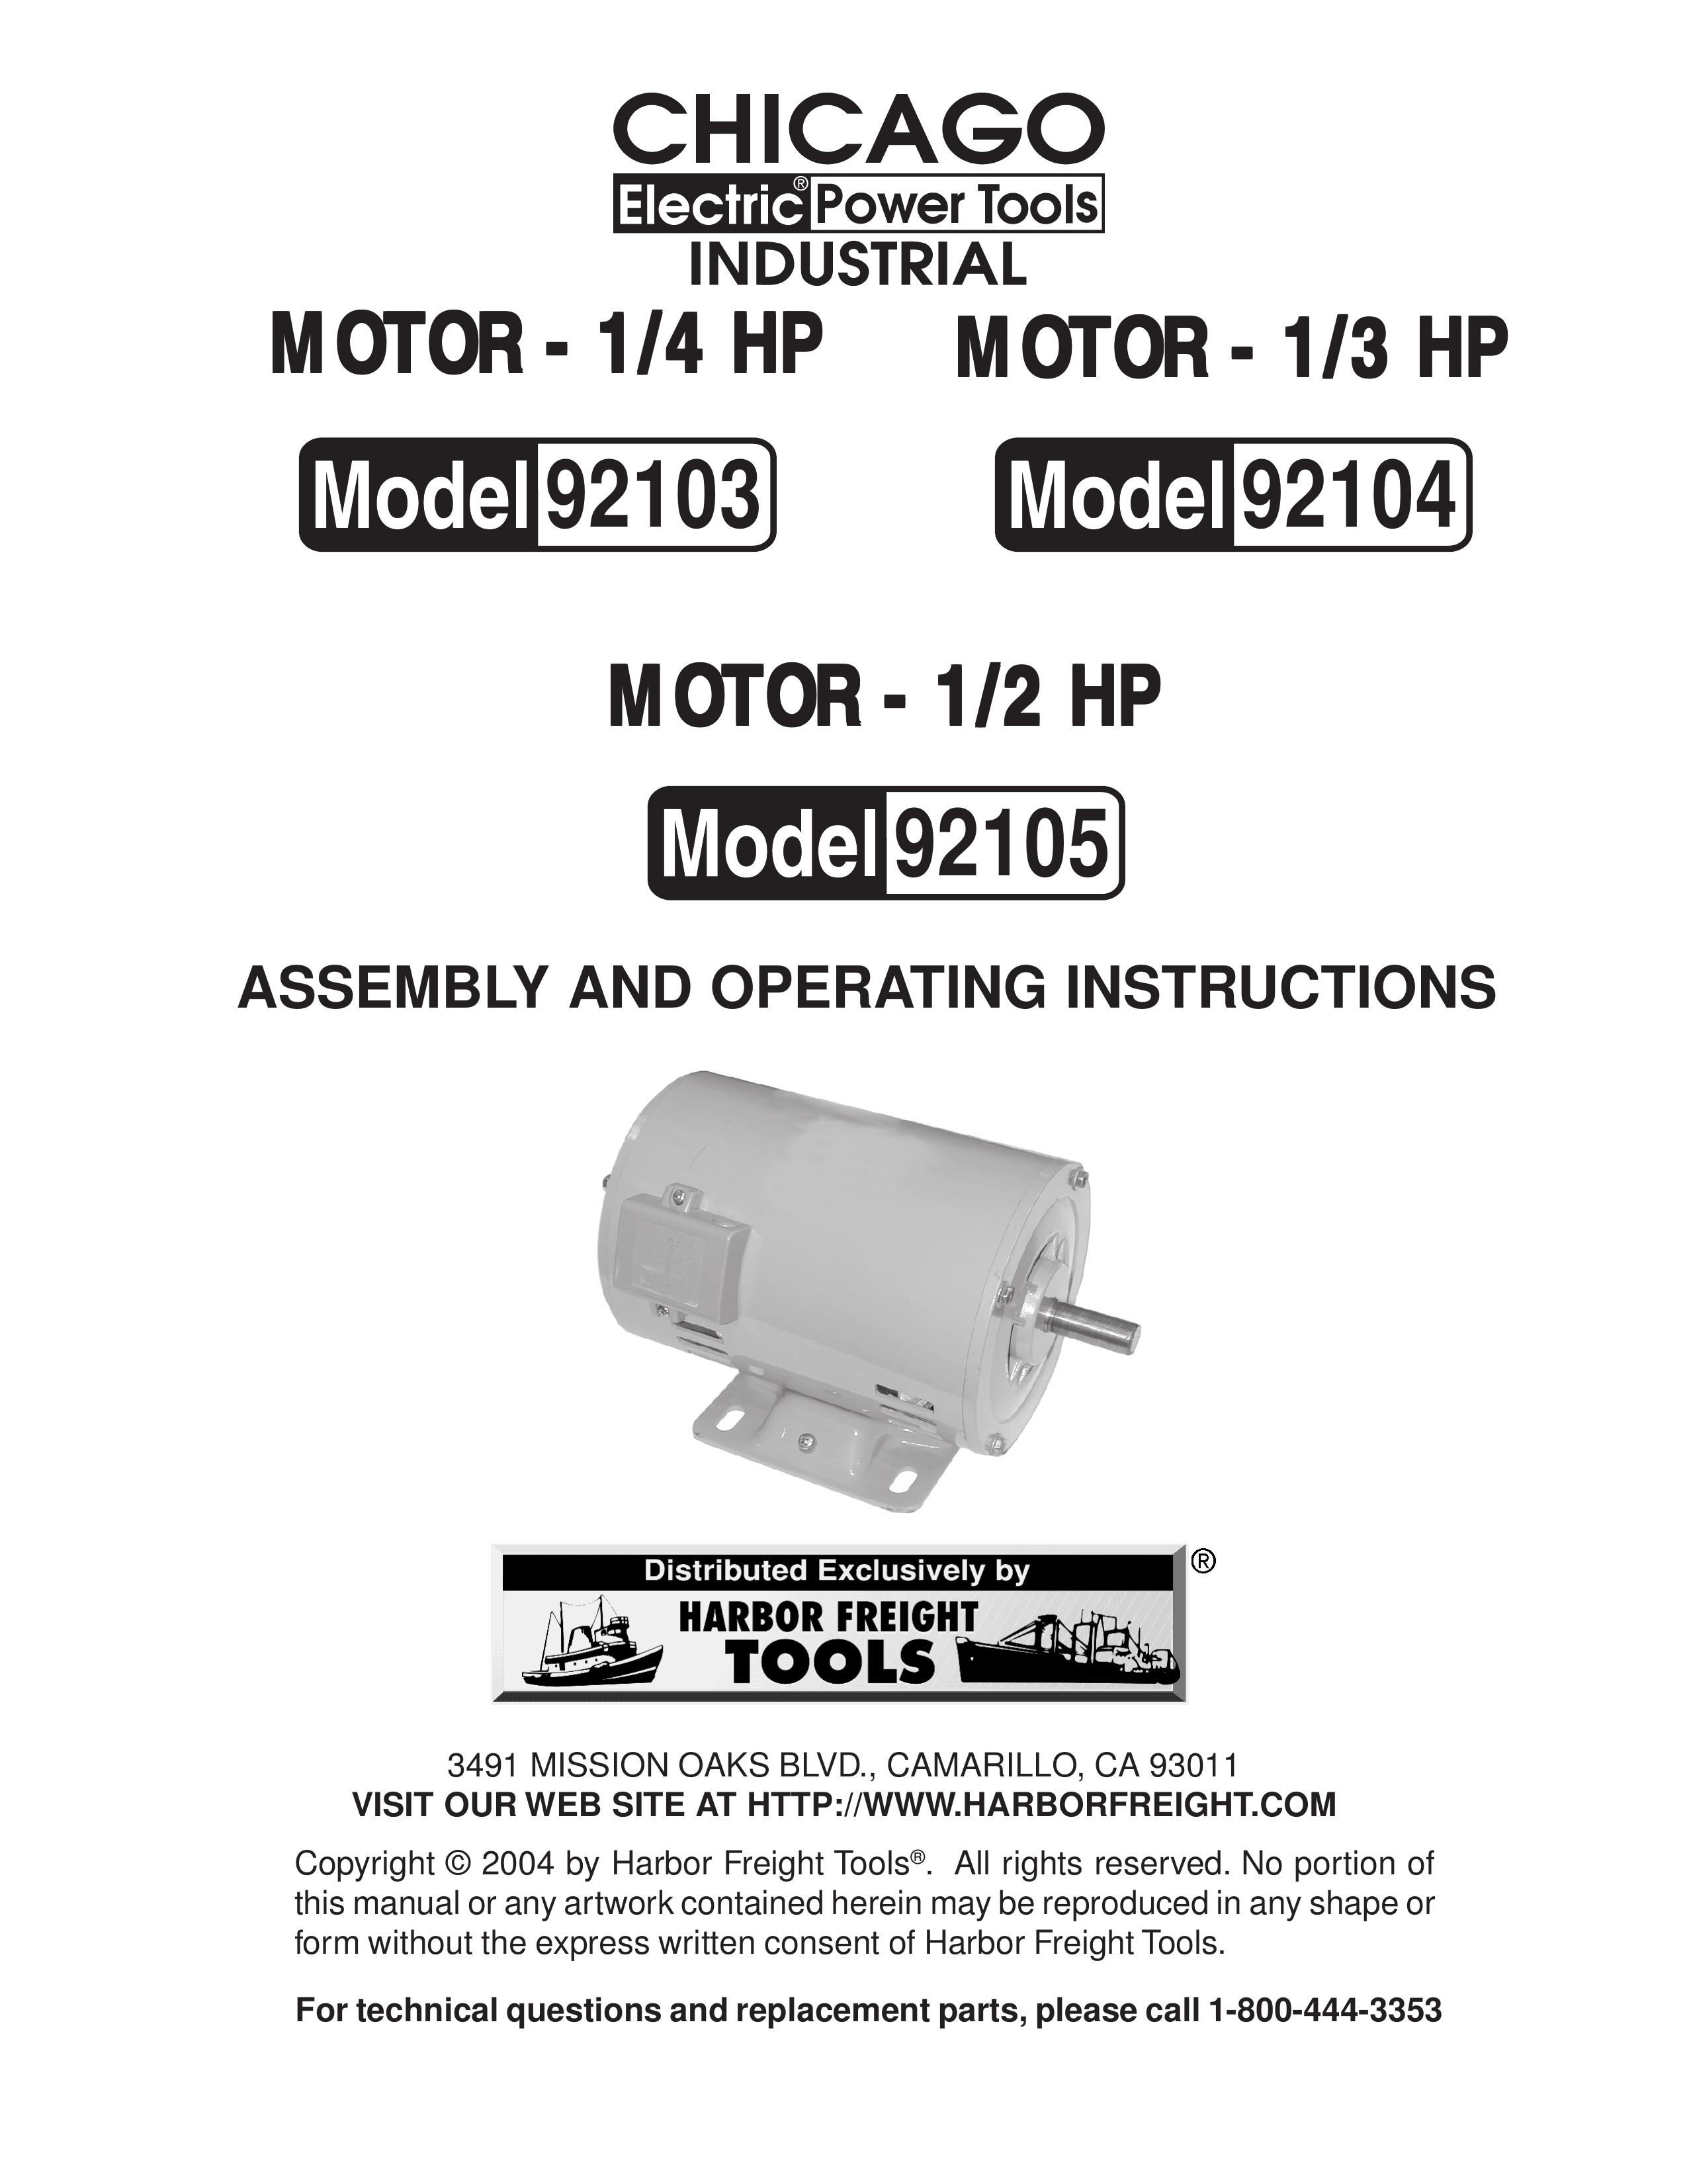 Harbor Freight Tools 92104 Outboard Motor User Manual